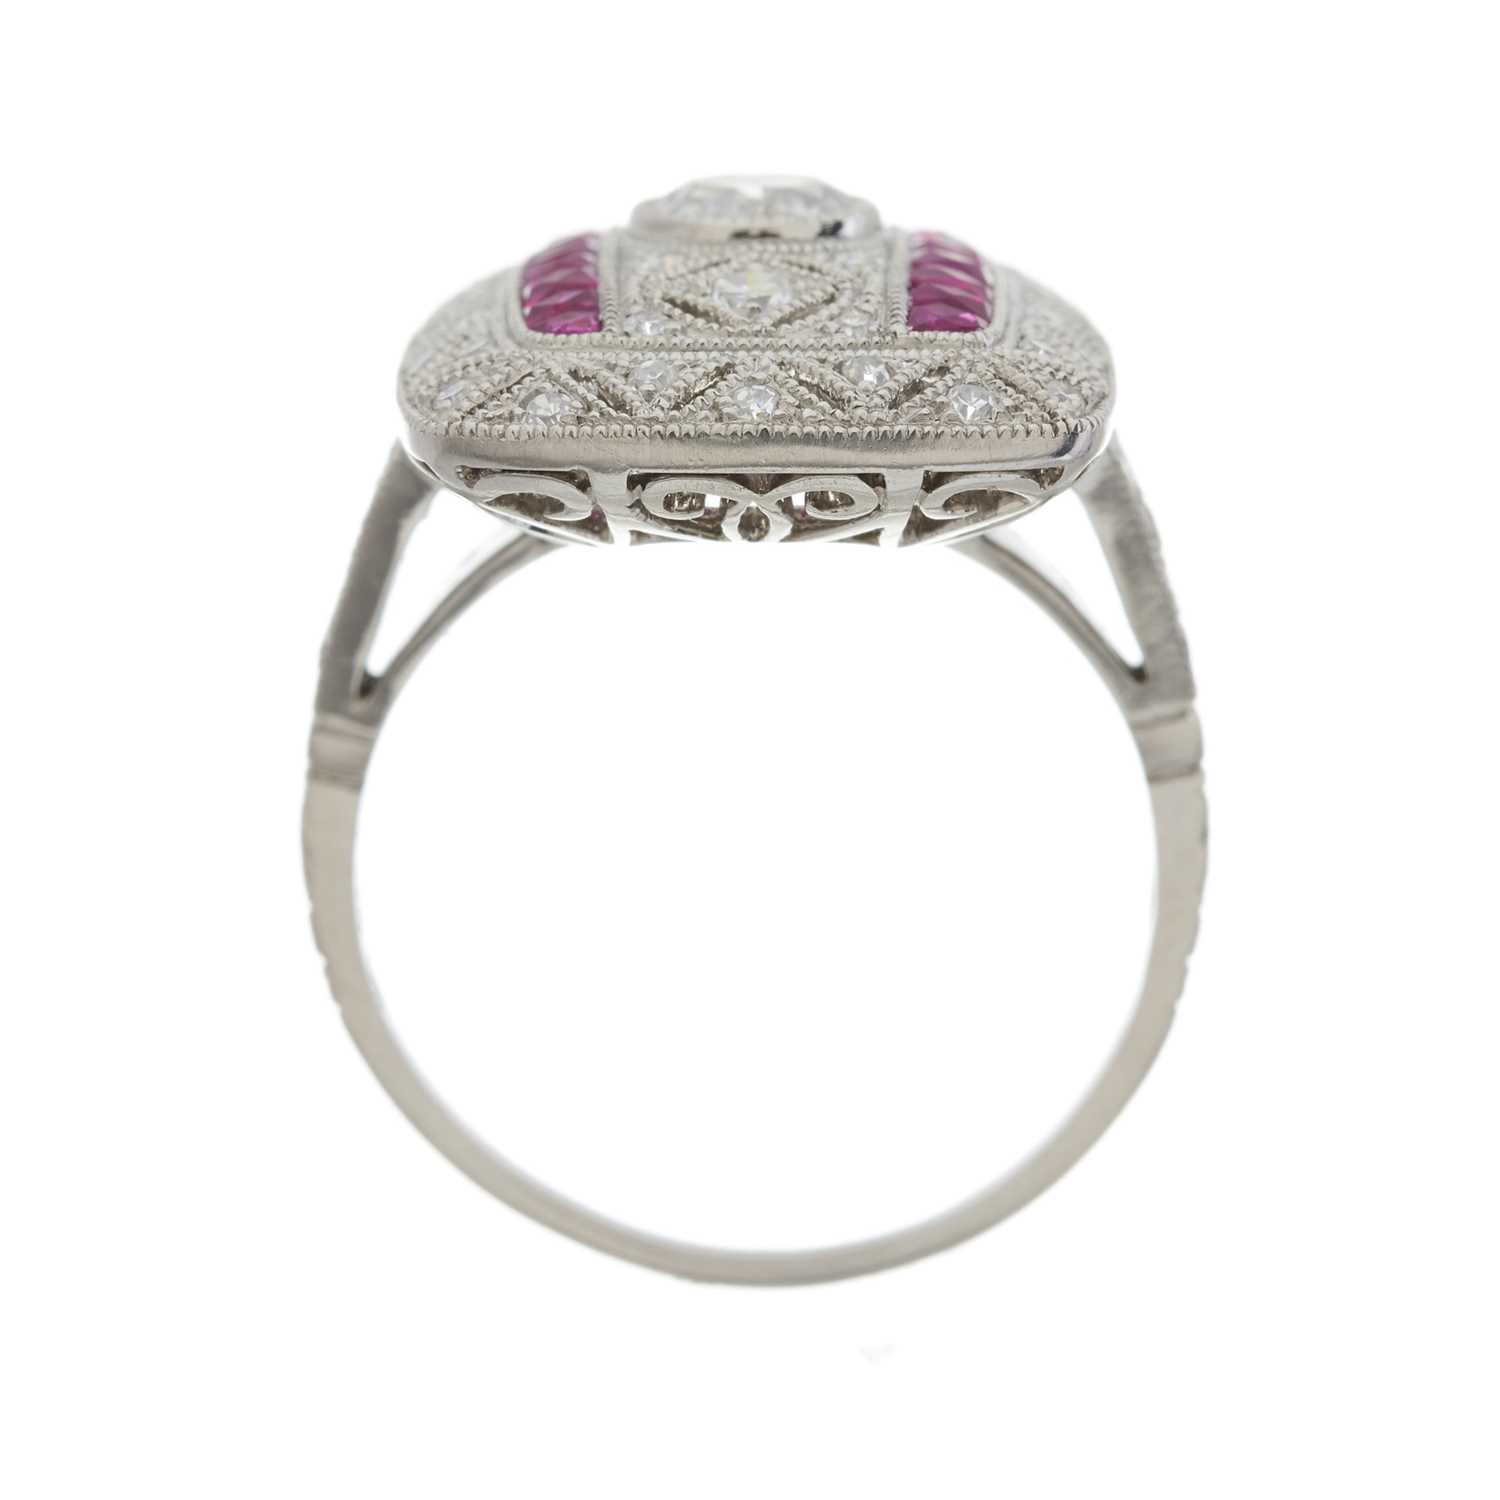 A platinum diamond and ruby openwork dress ring - Image 2 of 3